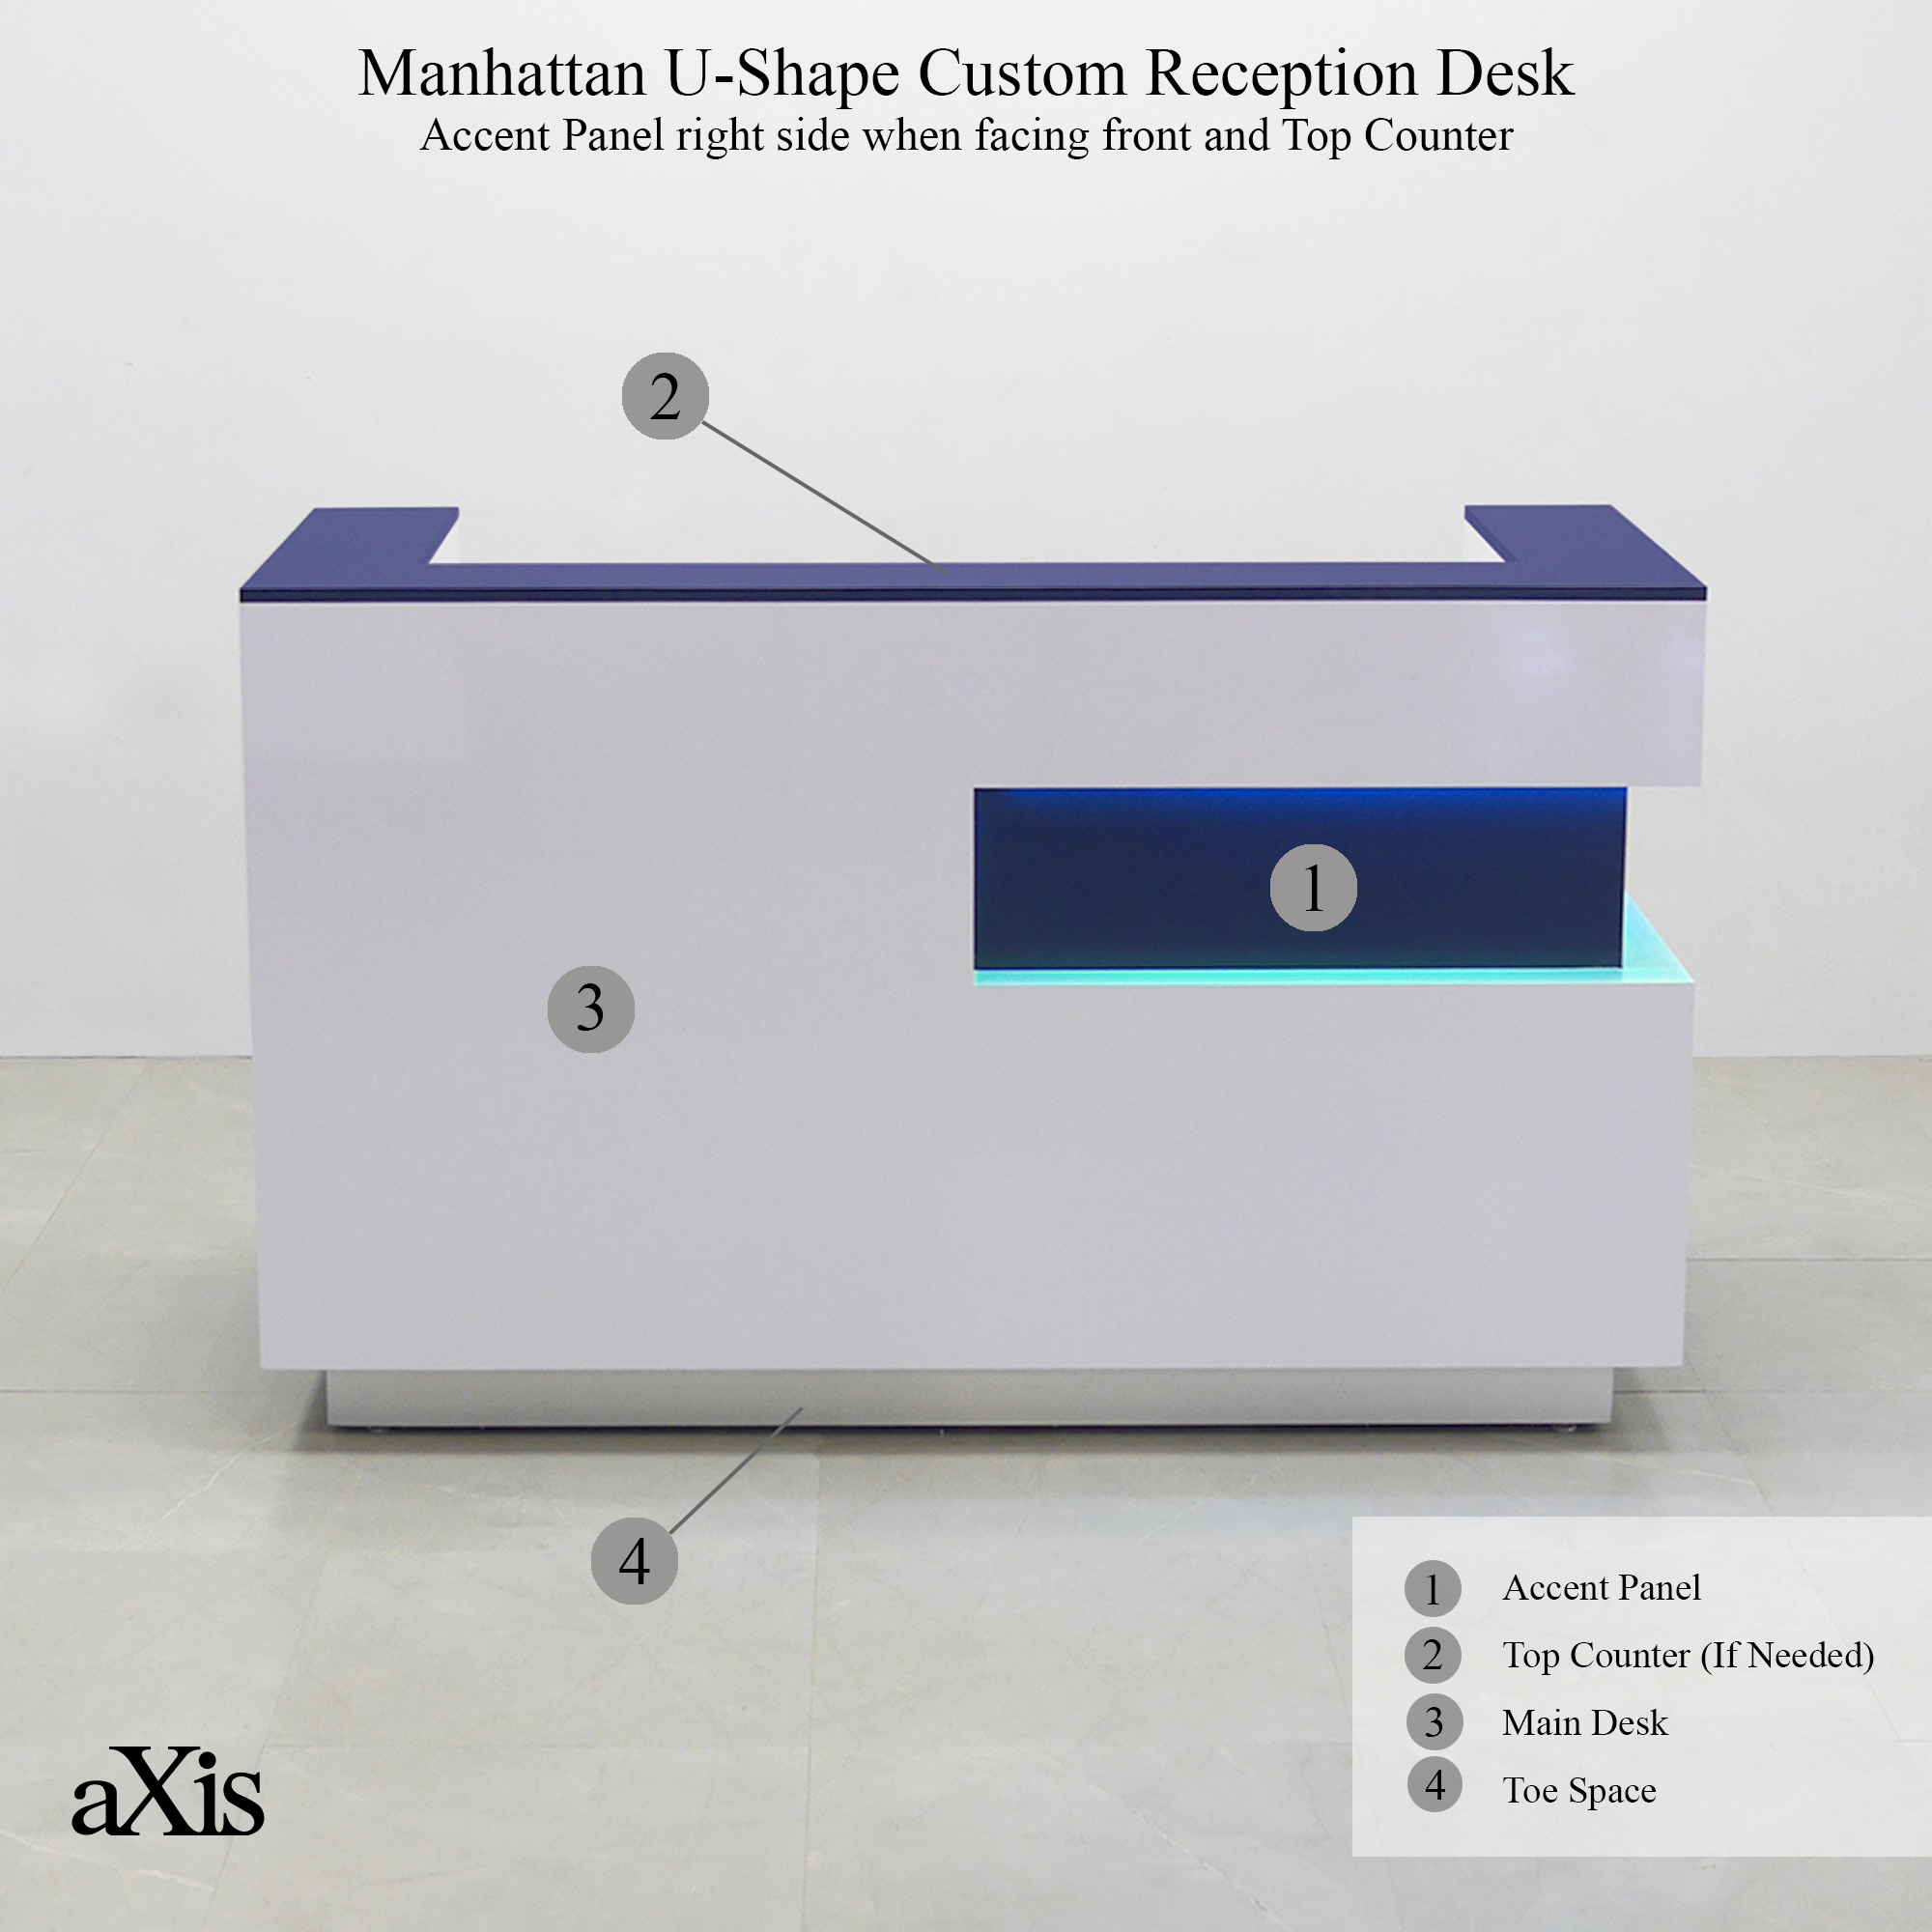 Manhattan U-Shape Custom Reception Desk in navy blue laminate accent panel and top counter, and white matte laminate main desk, with multi-colored LED shown here.